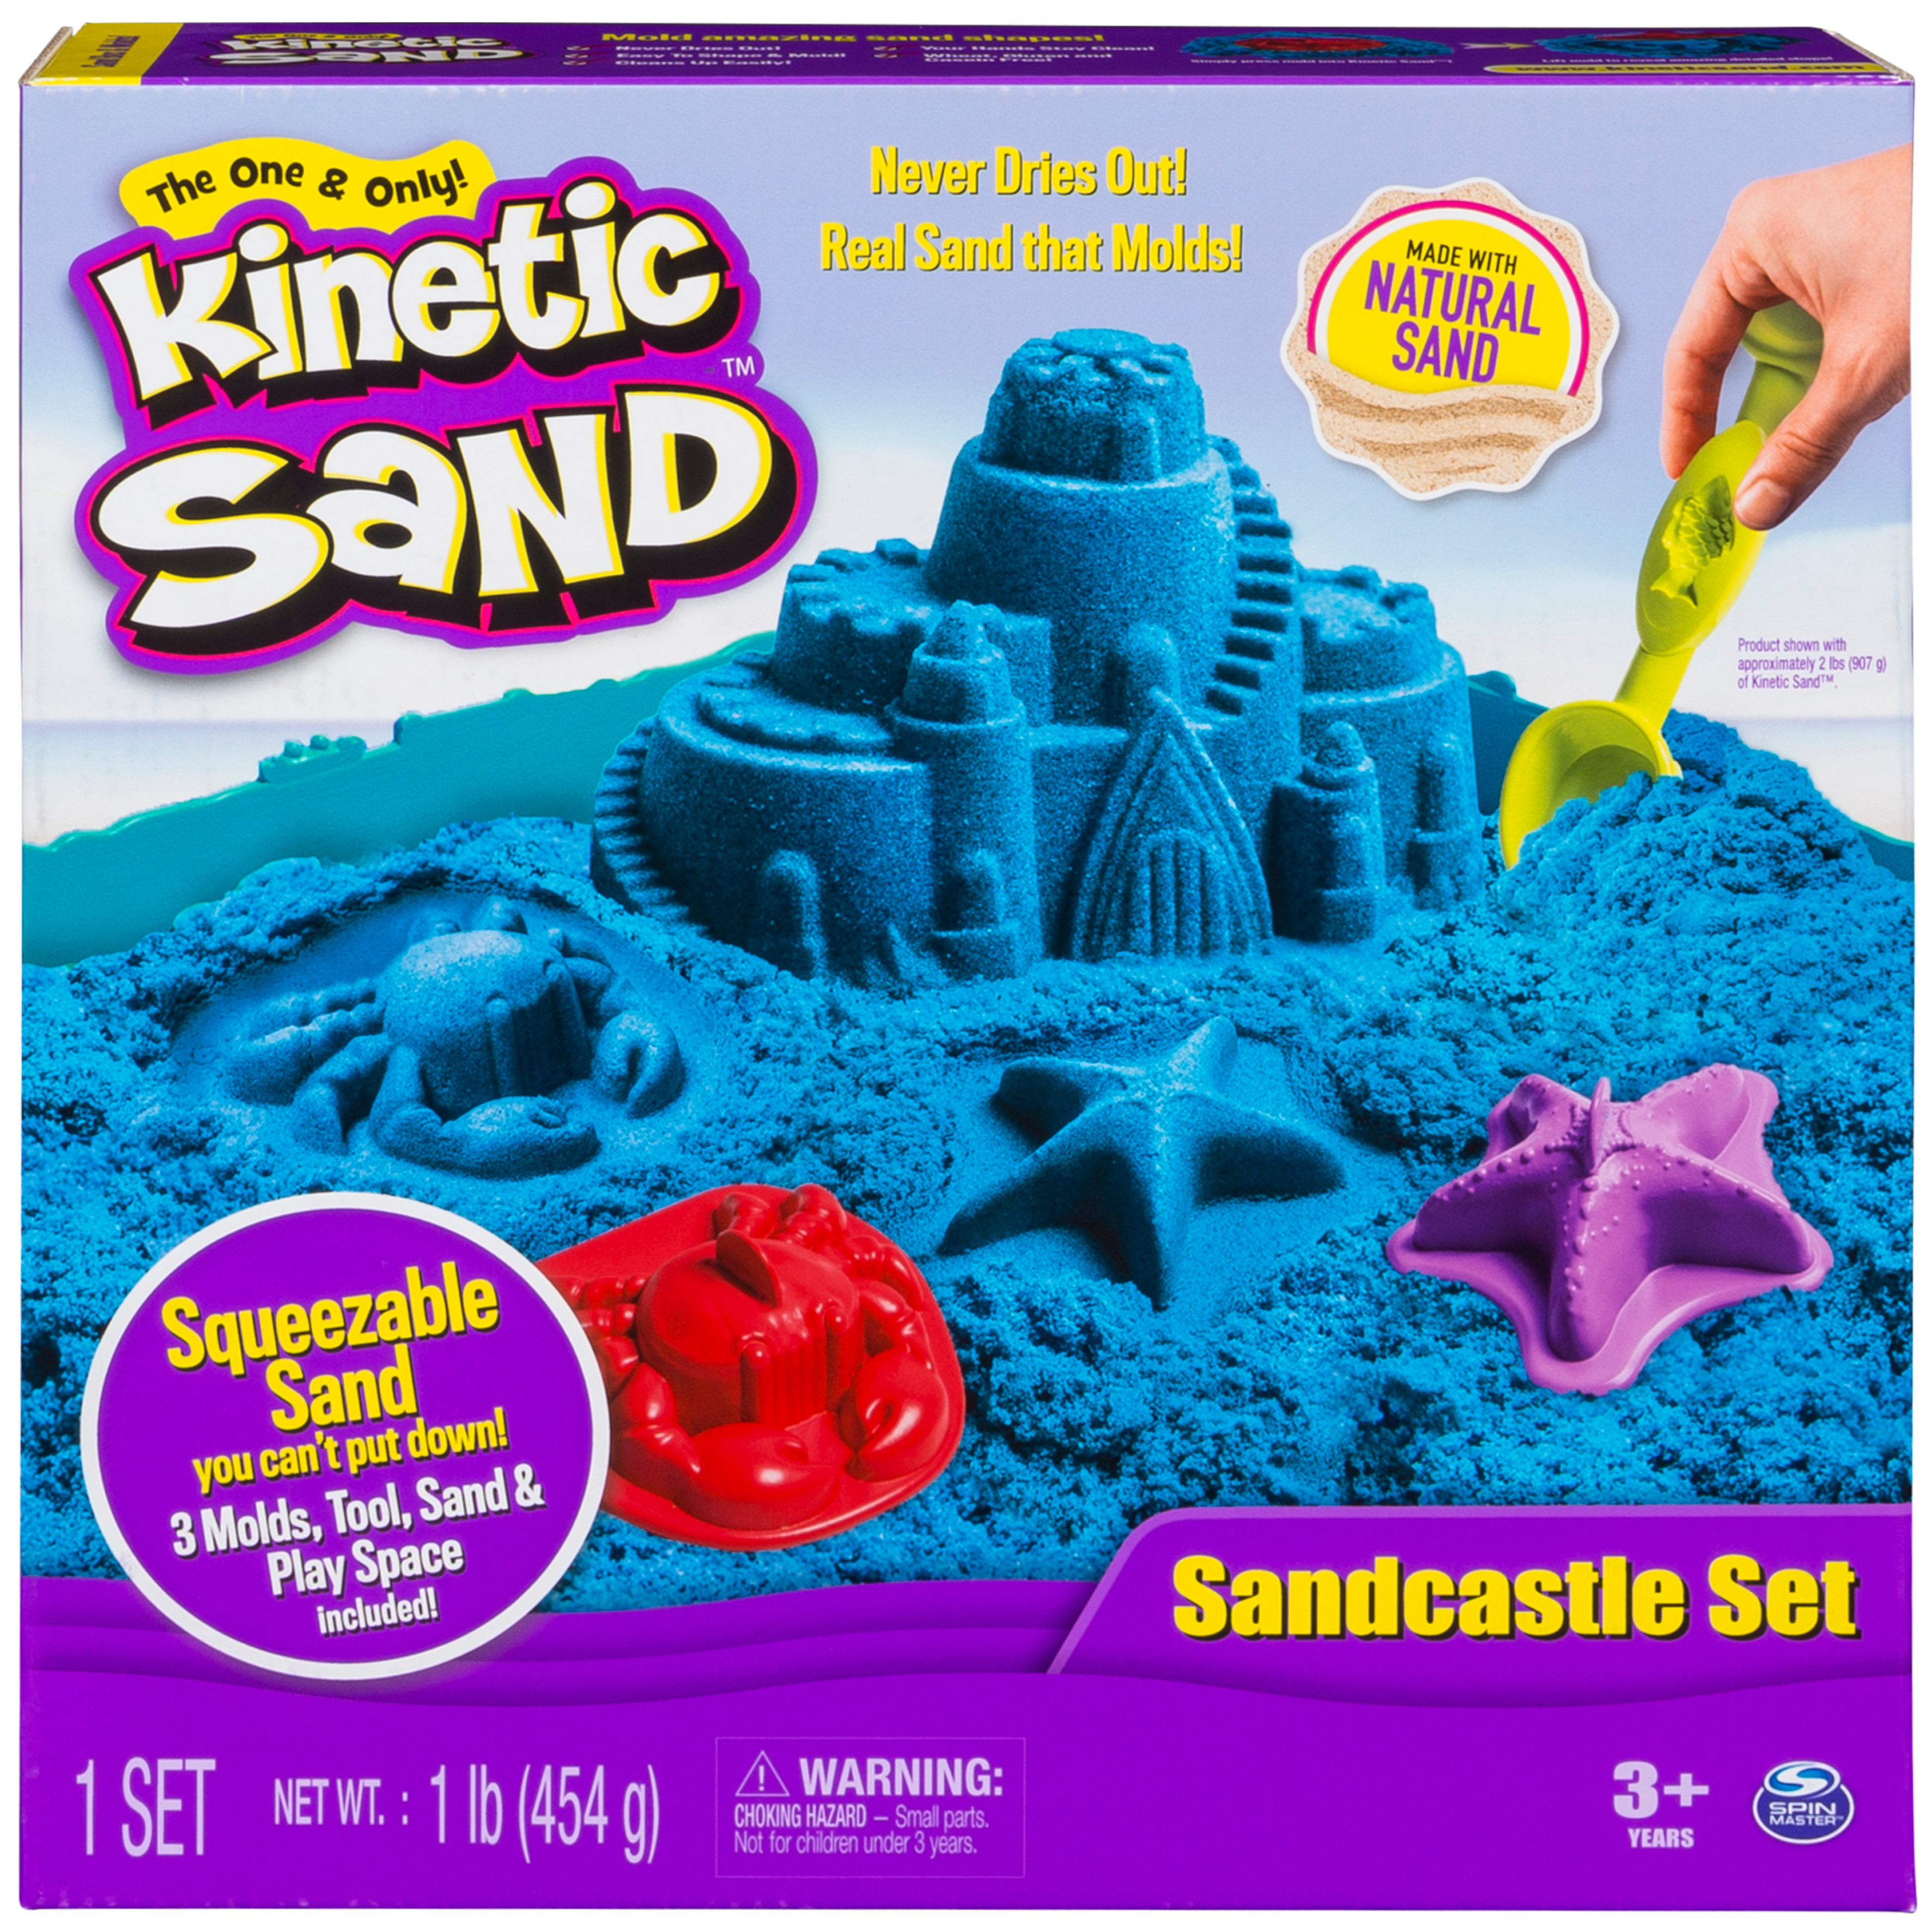 Kinetic Sand Sandcastle Set with 1lb of Kinetic Sand and Tools and Molds (Color May Vary) - image 1 of 9